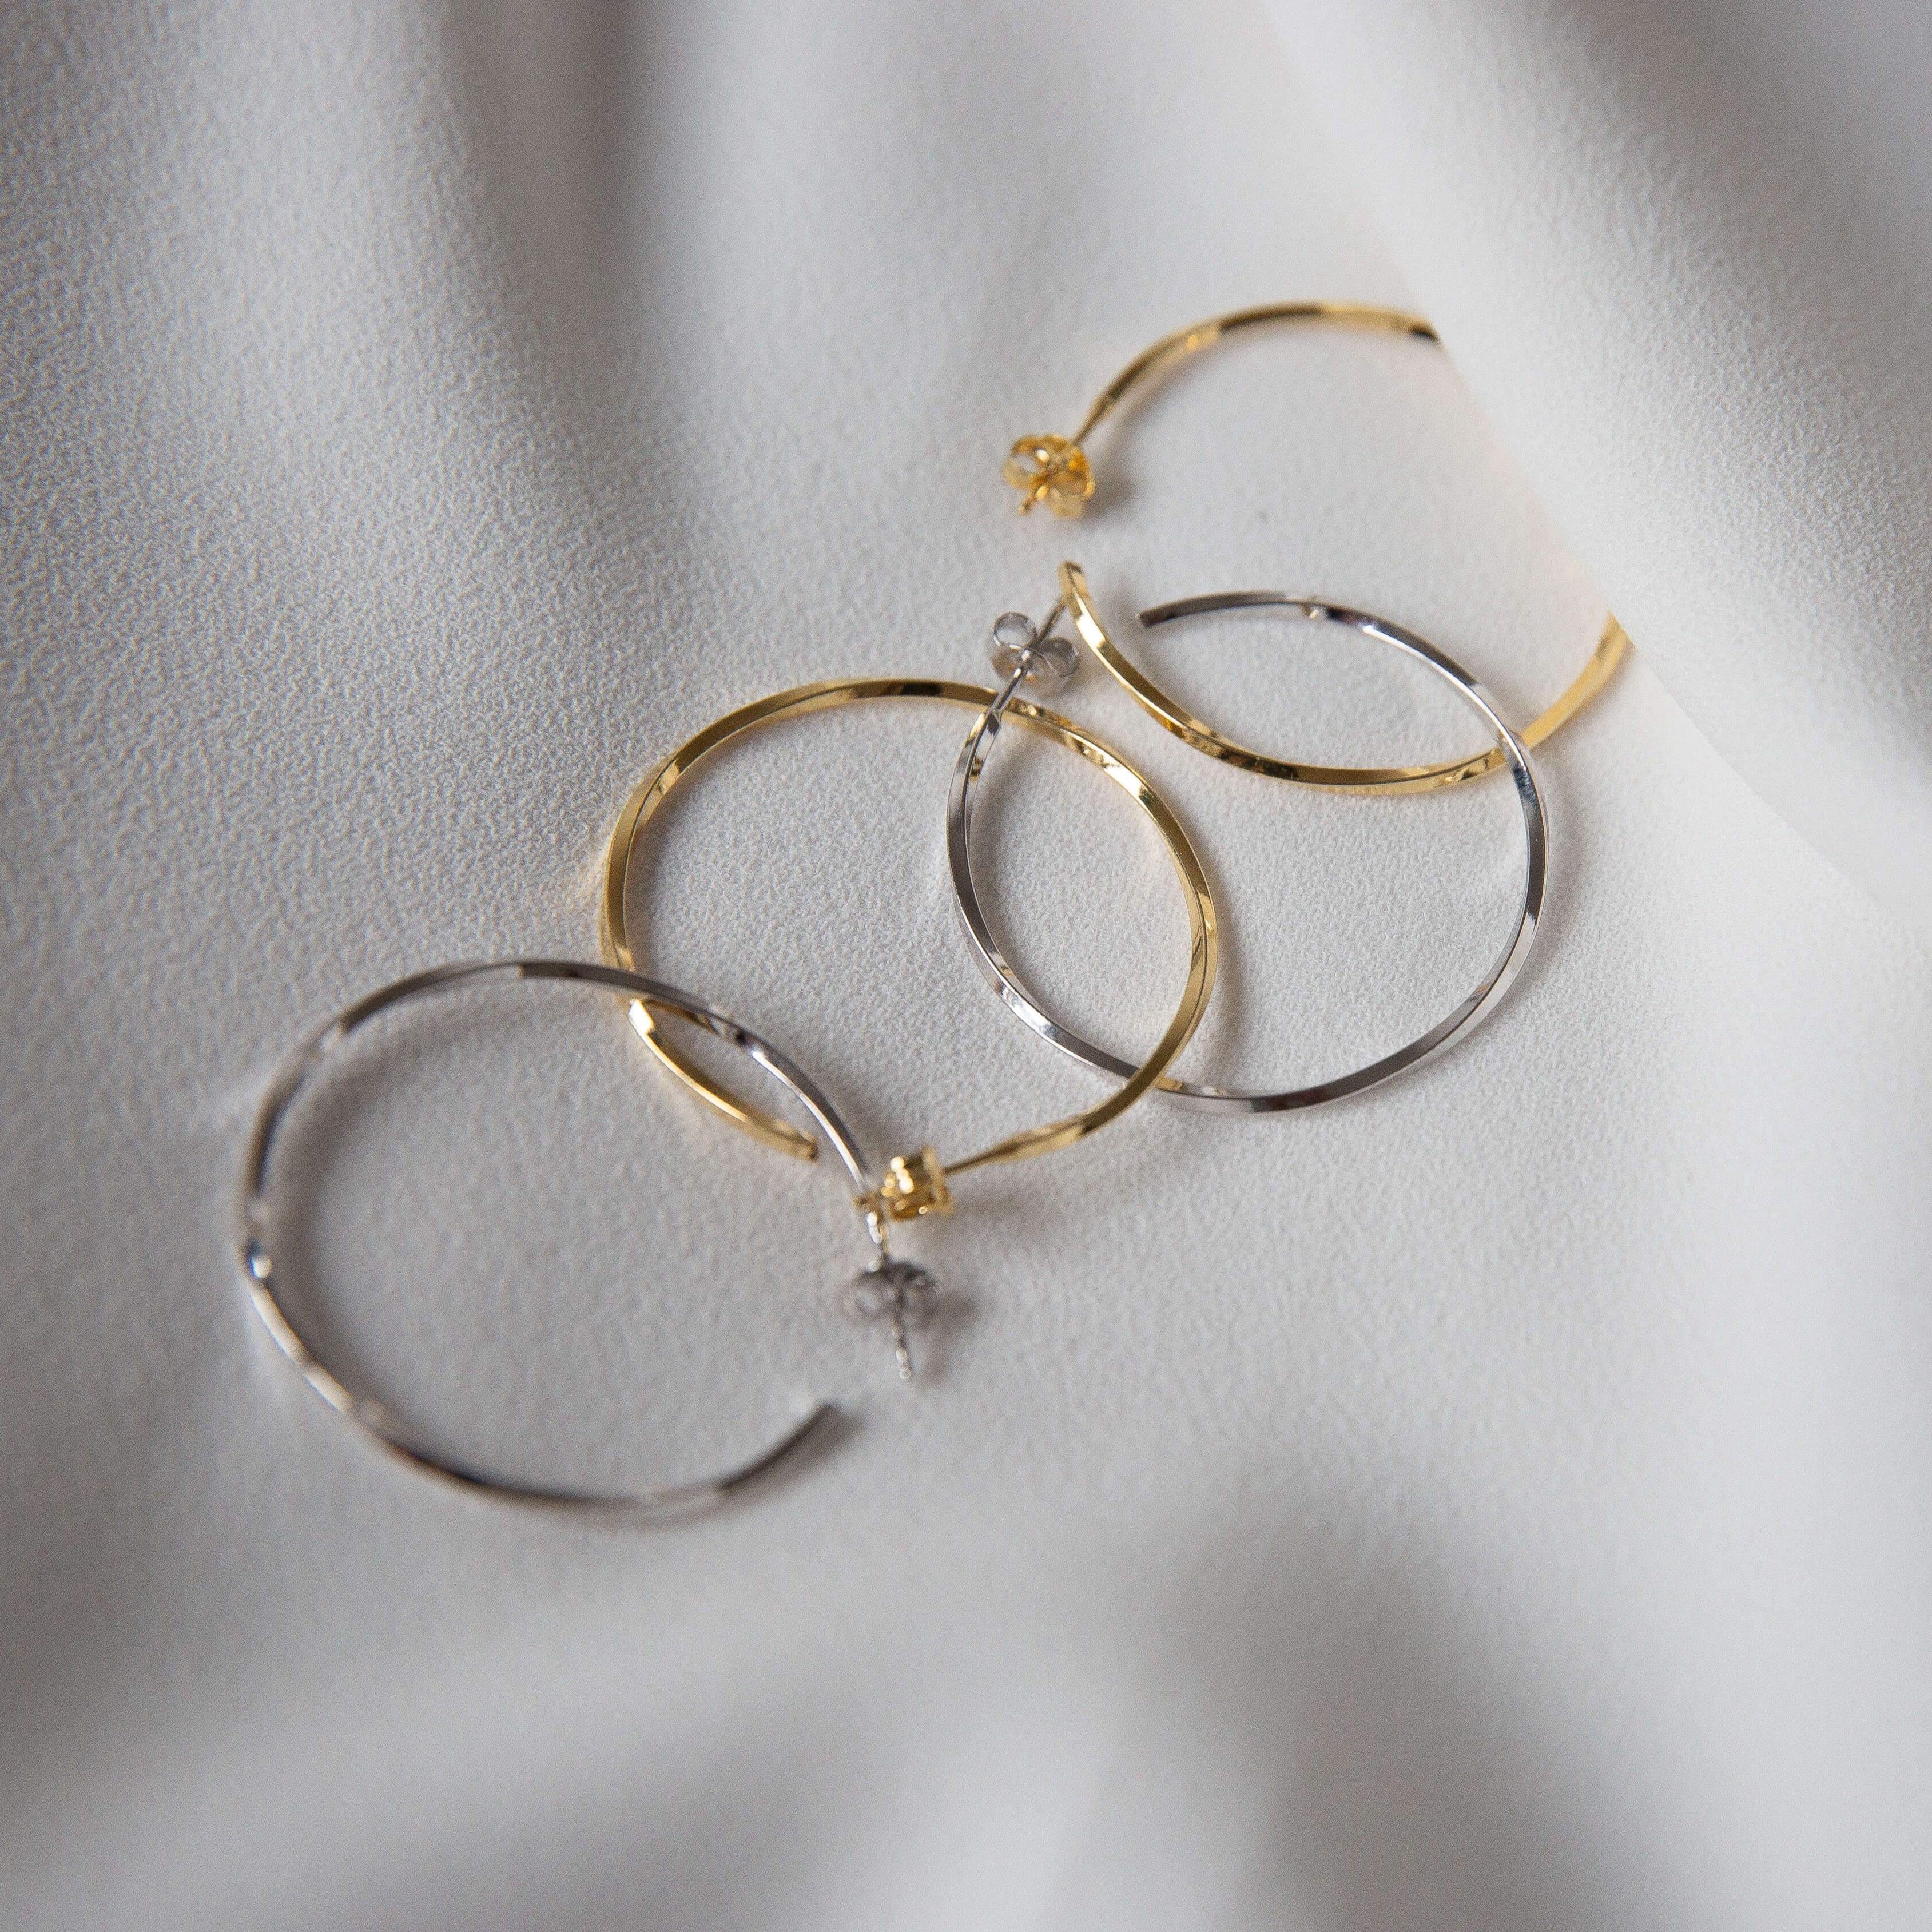 Lago di Como - 3 x Sizes, Gold, Silver & Rose Gold - THE HOOP STATION